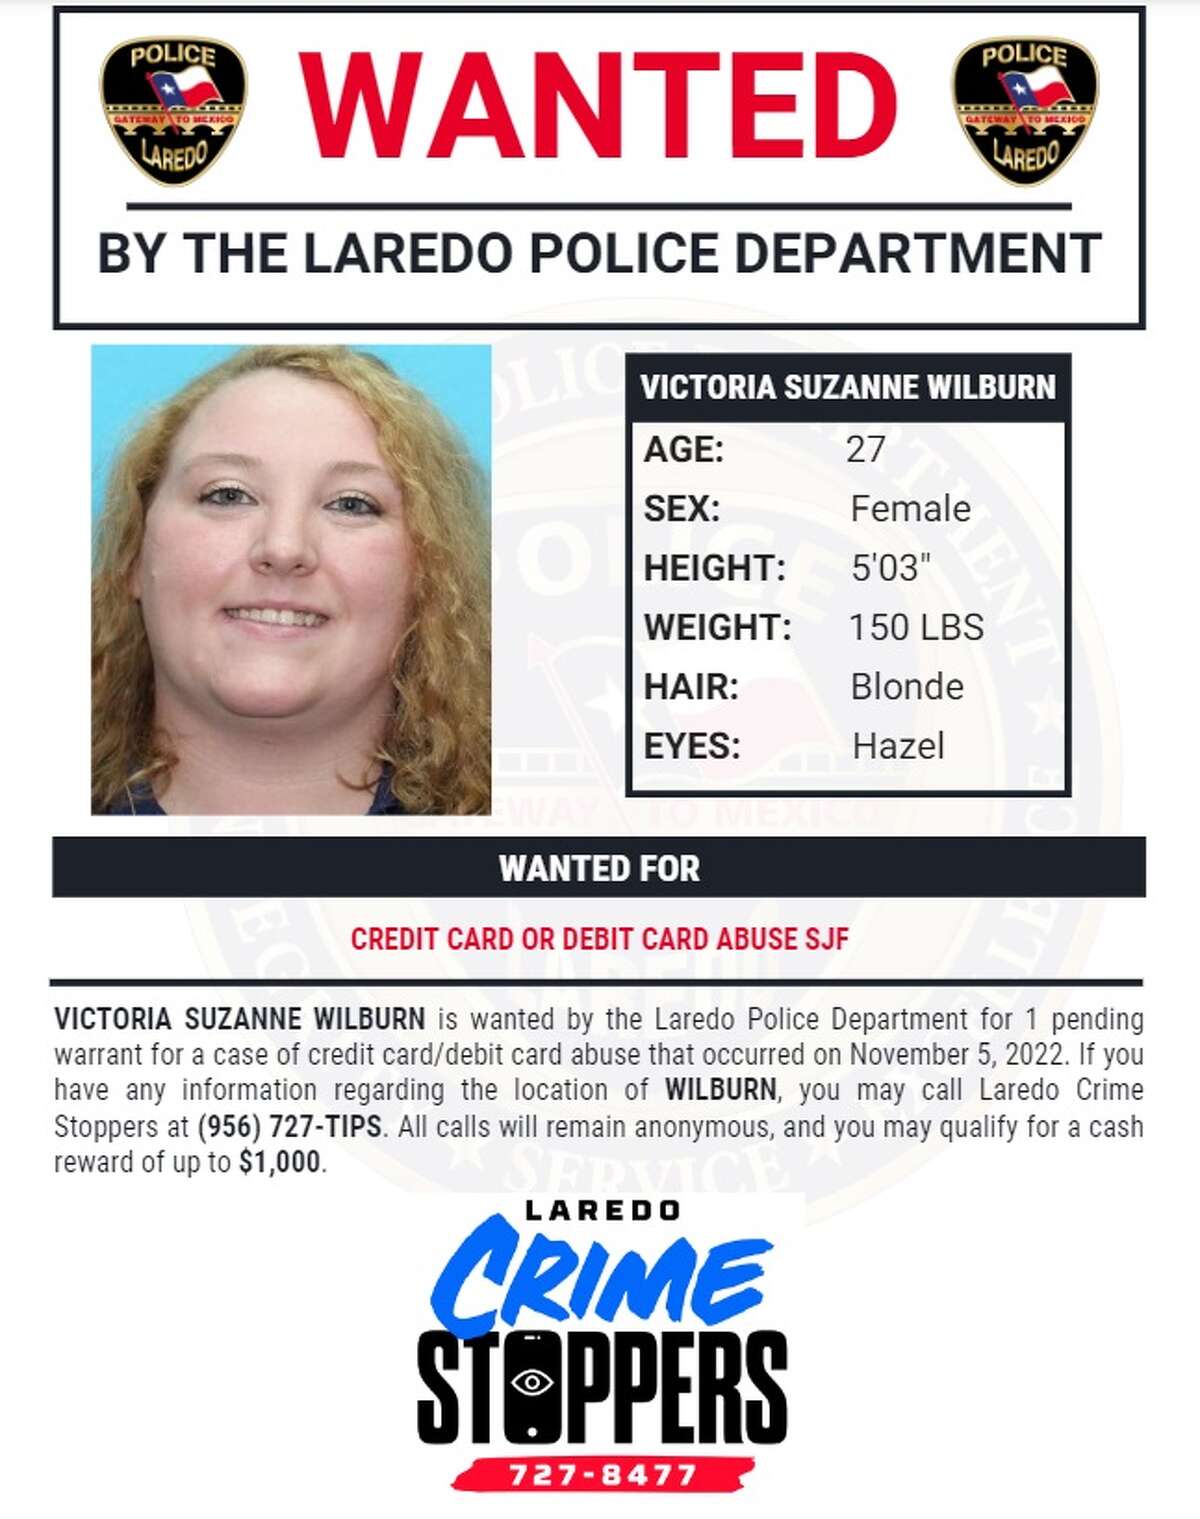 Authorities said Thursday that they are on the lookout for Victoria Suzanne Wilburn, who currently has a pending arrest warrant charging her with credit card/de